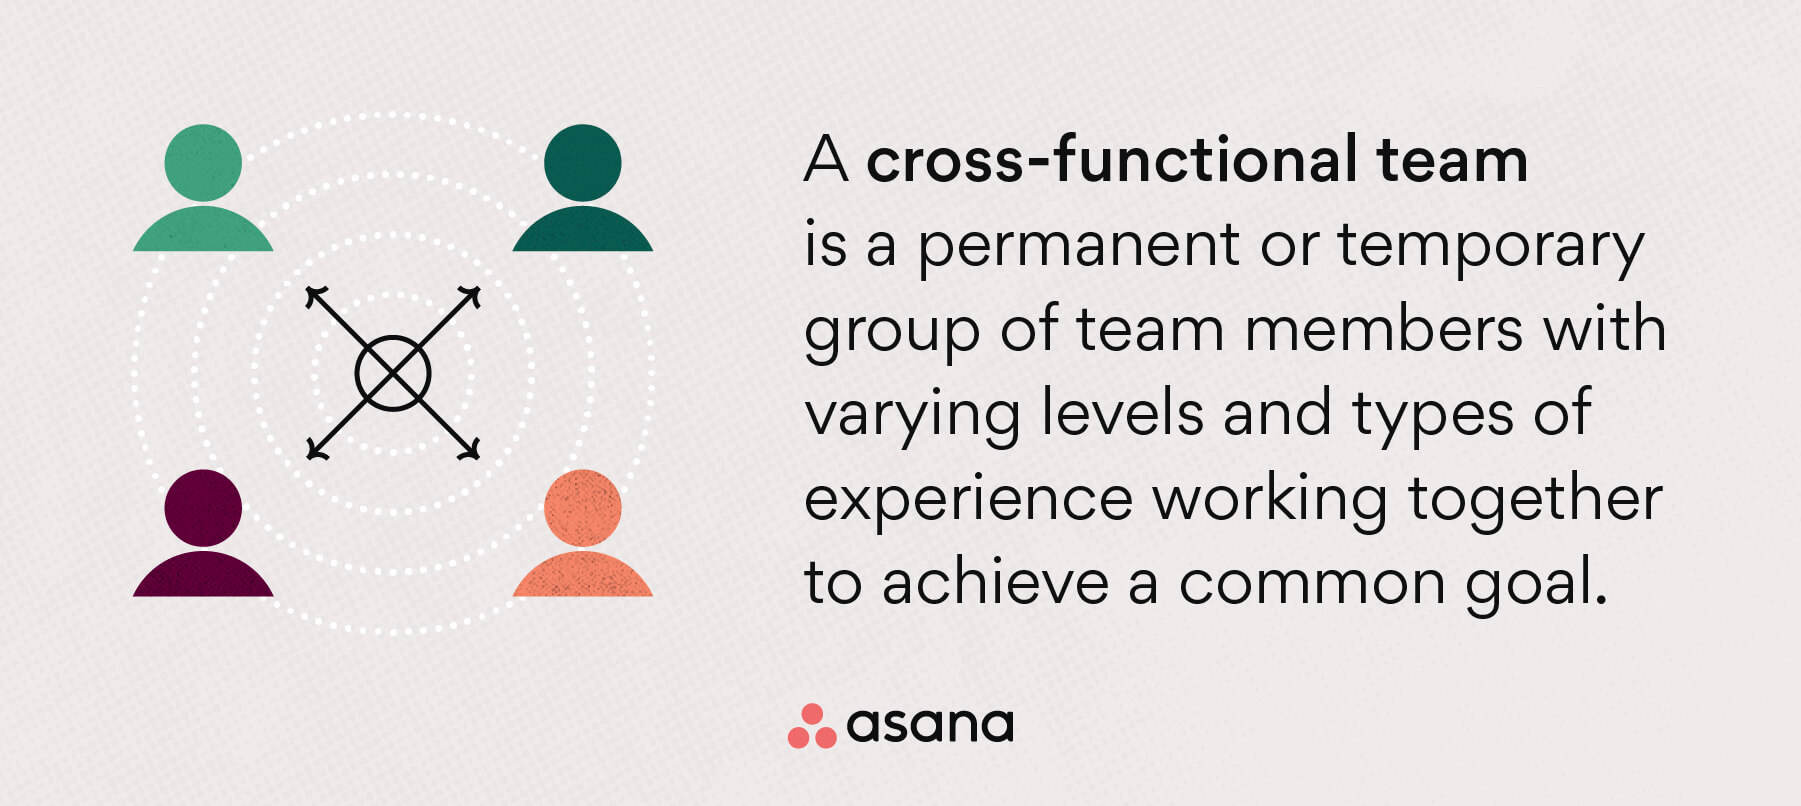 What is a cross-functional team?